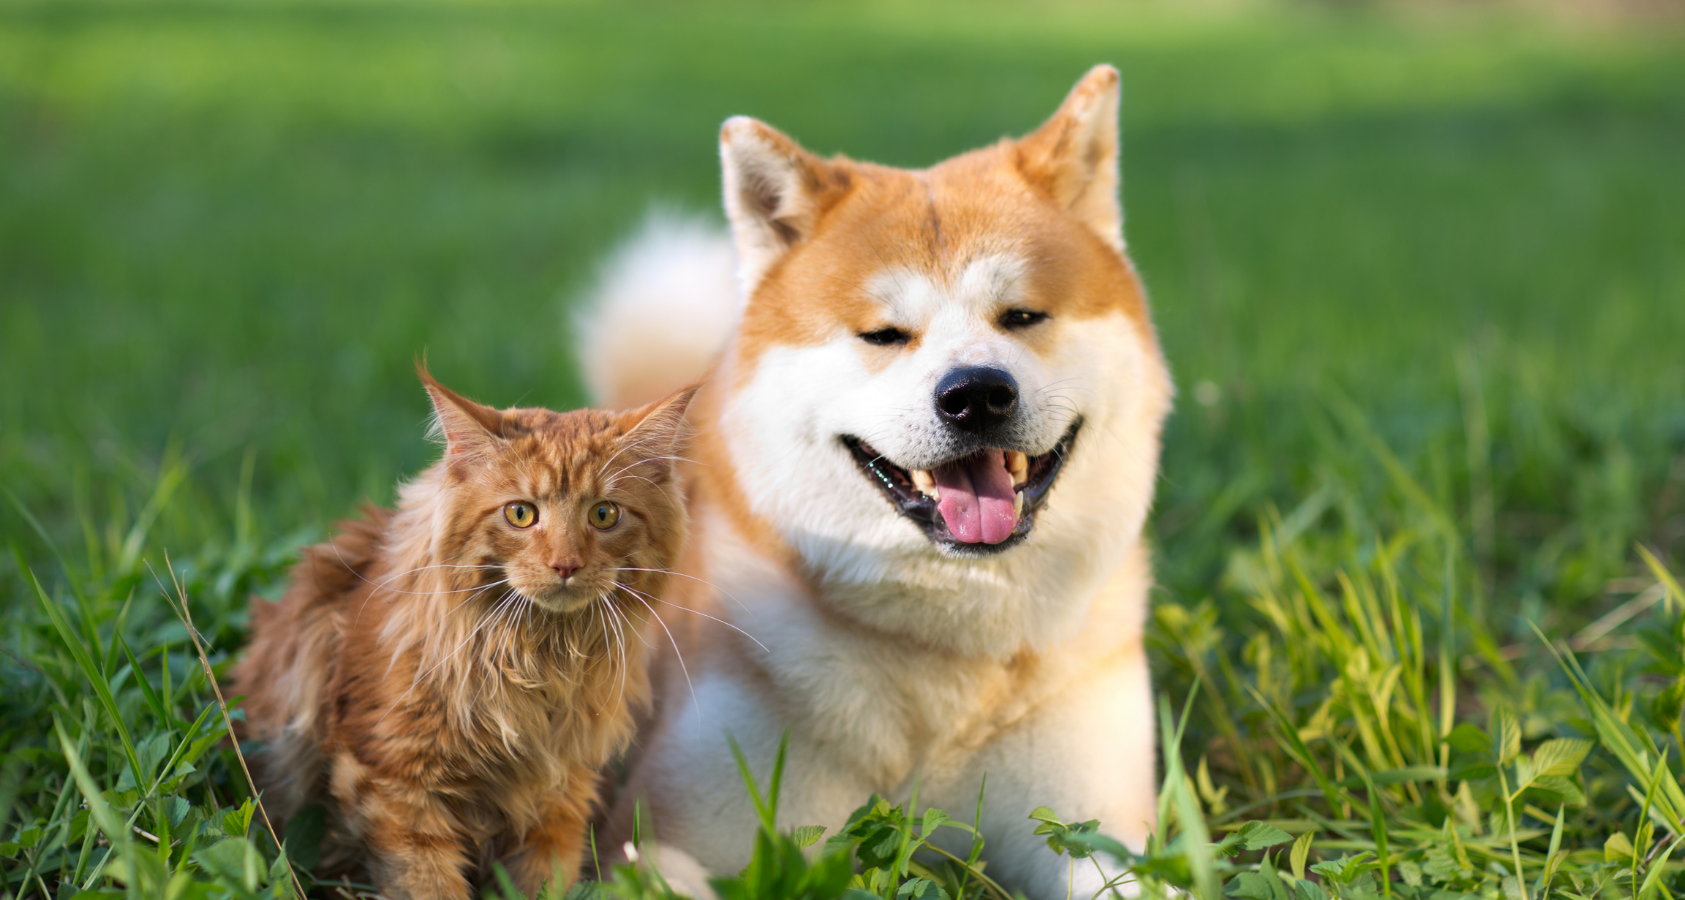 Can a Dog Penetrate a Cat? Cats and Dogs Mating - Barkmind